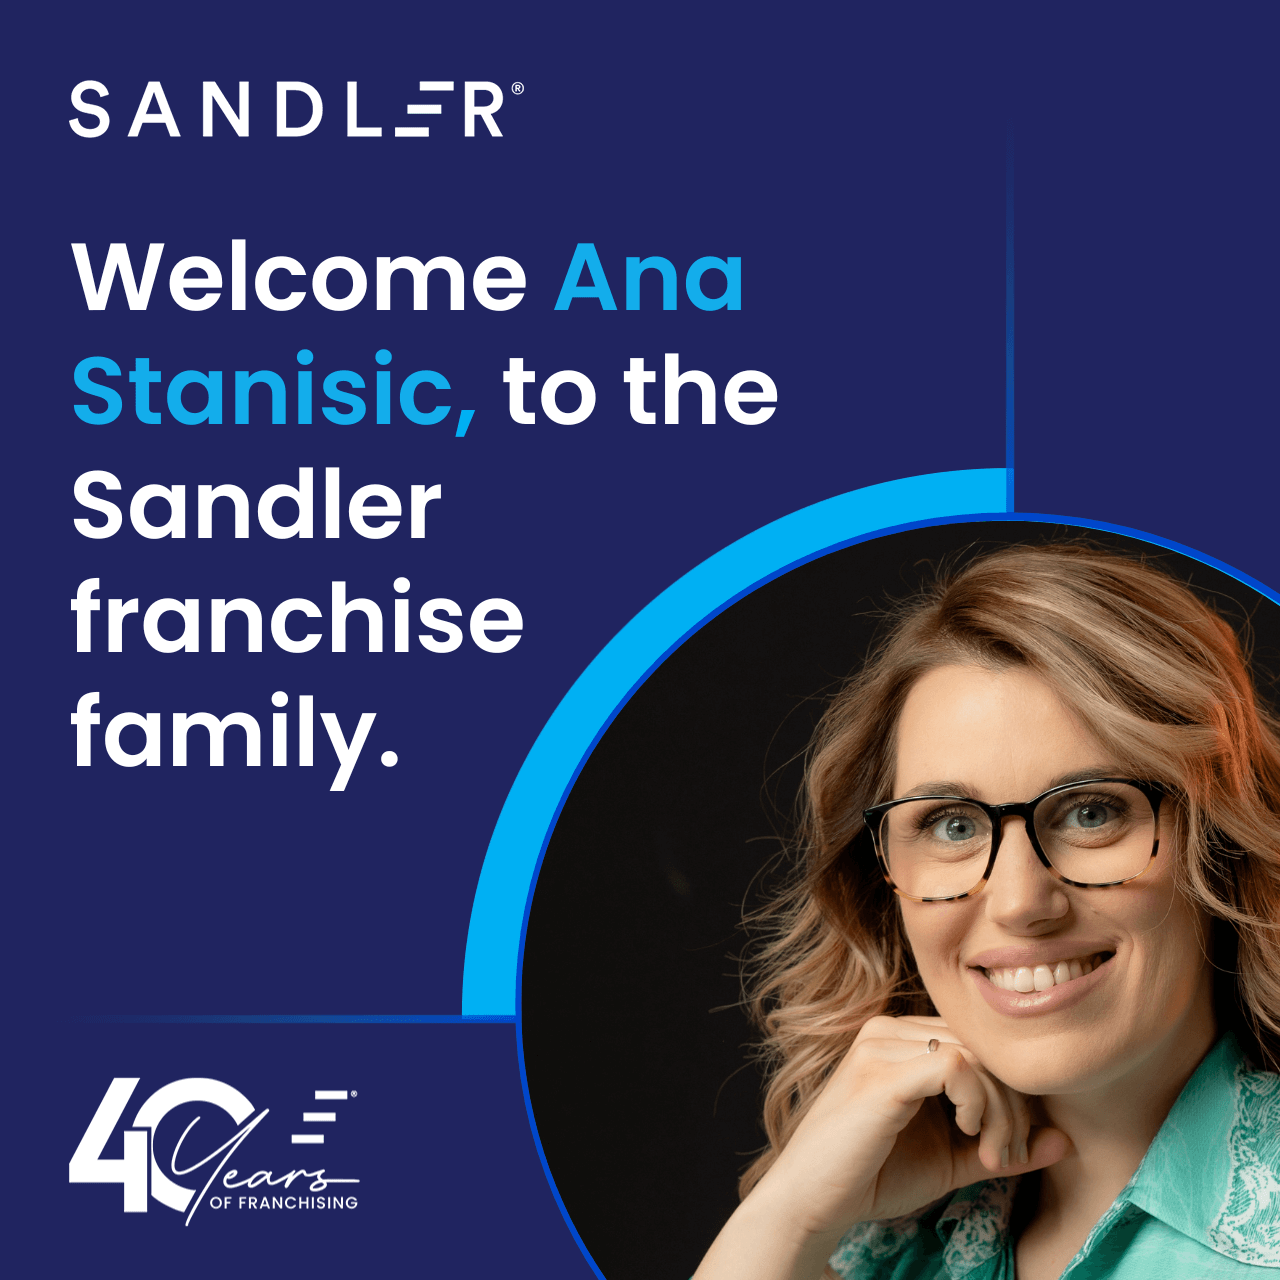 Sandler Expands Global Footprint with New Franchise in Dubai